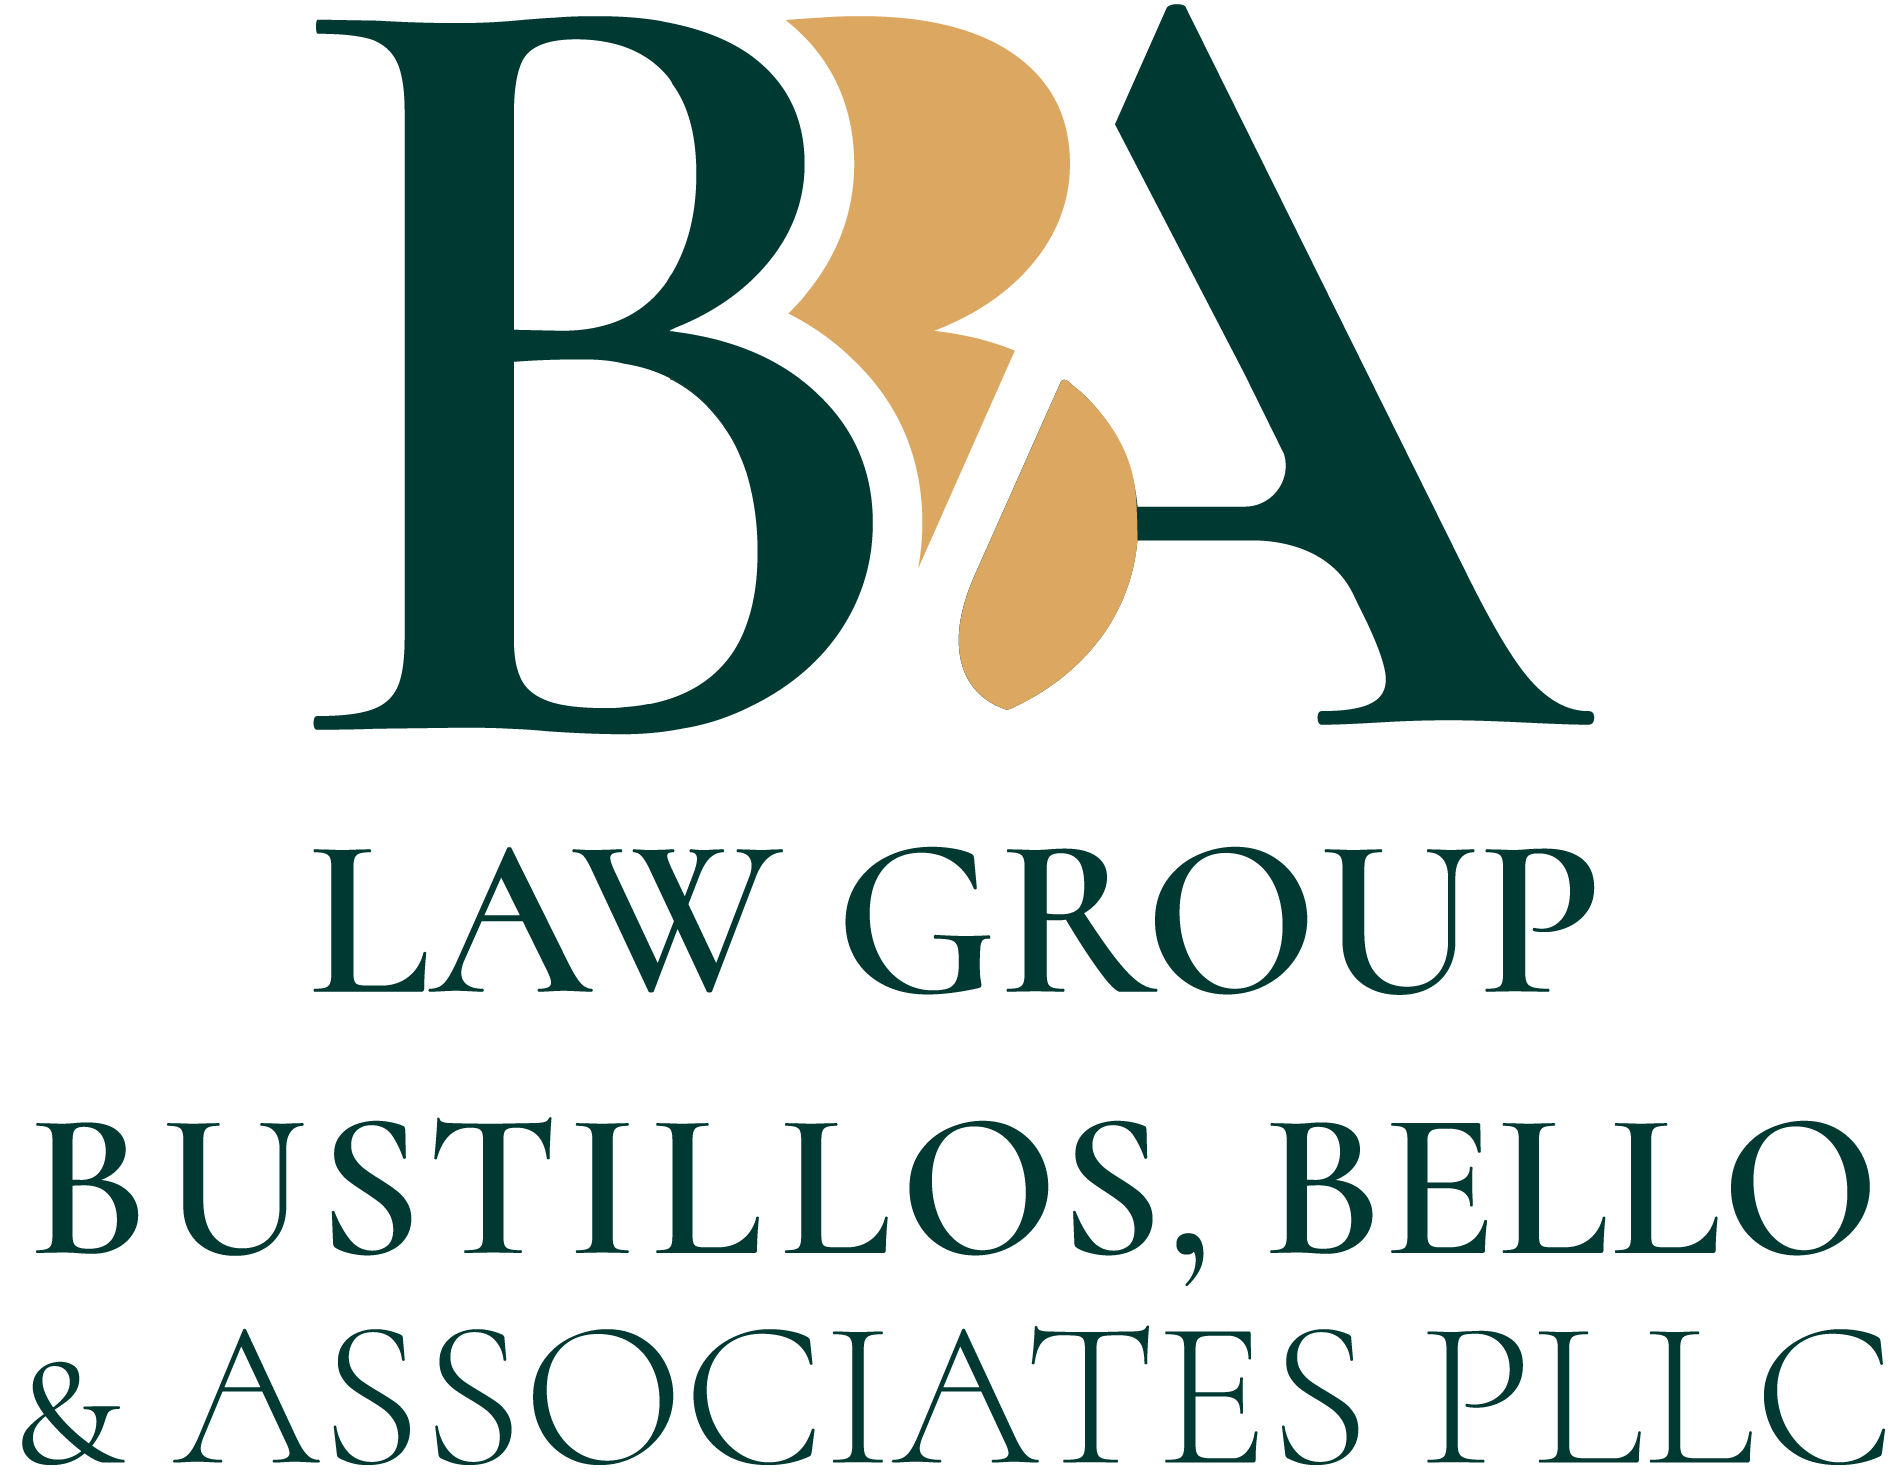 BBA Law Group